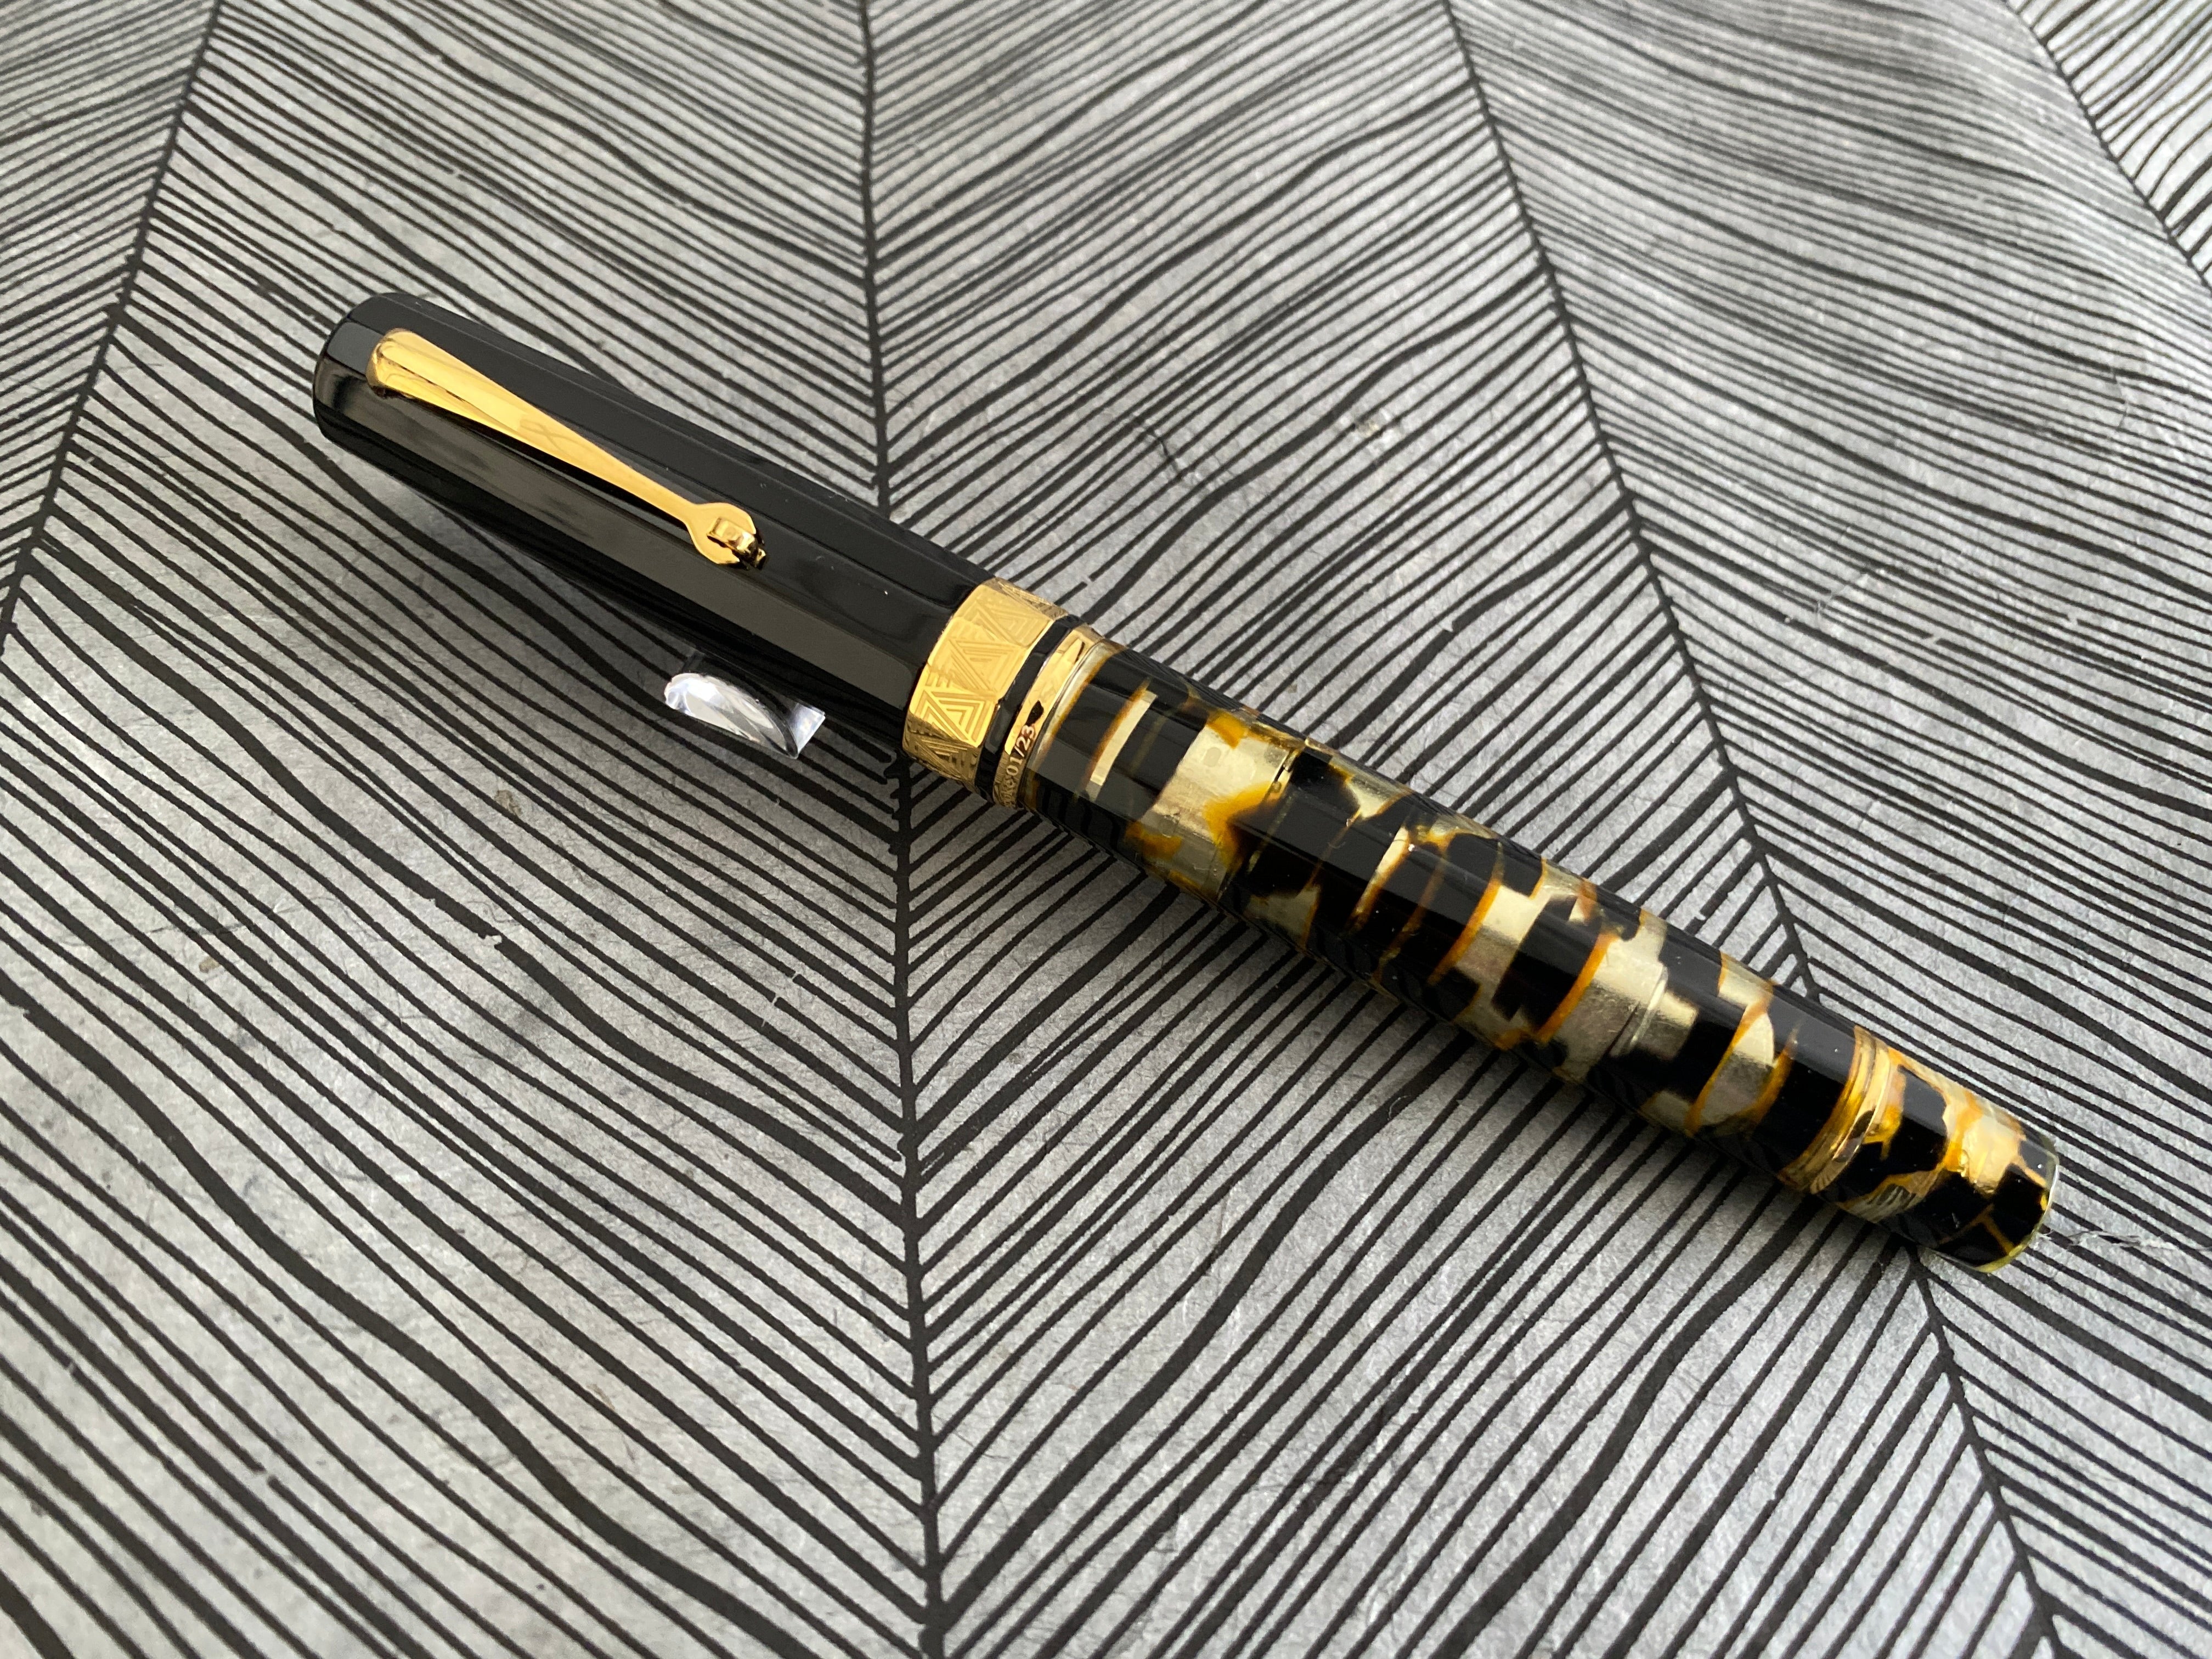 NEW! ASC Gladiatore Medio Bespoke Black Lucens Celluloid - Limited Edition of 23 Pens